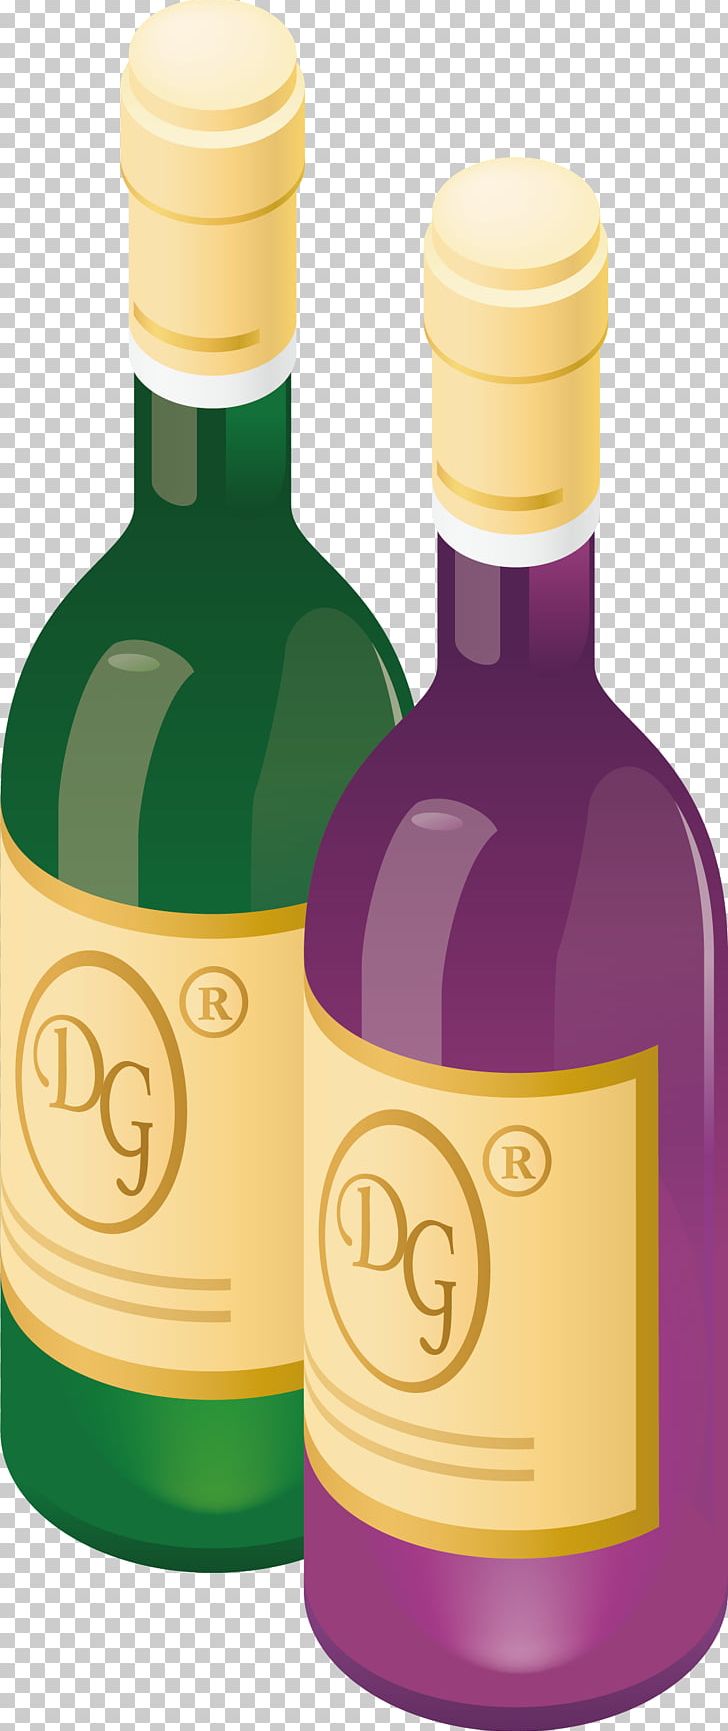 Red Wine White Wine Beer Rosxe9 PNG, Clipart, Beer, Bottle, Cartoon, Decorative Elements, Drink Free PNG Download